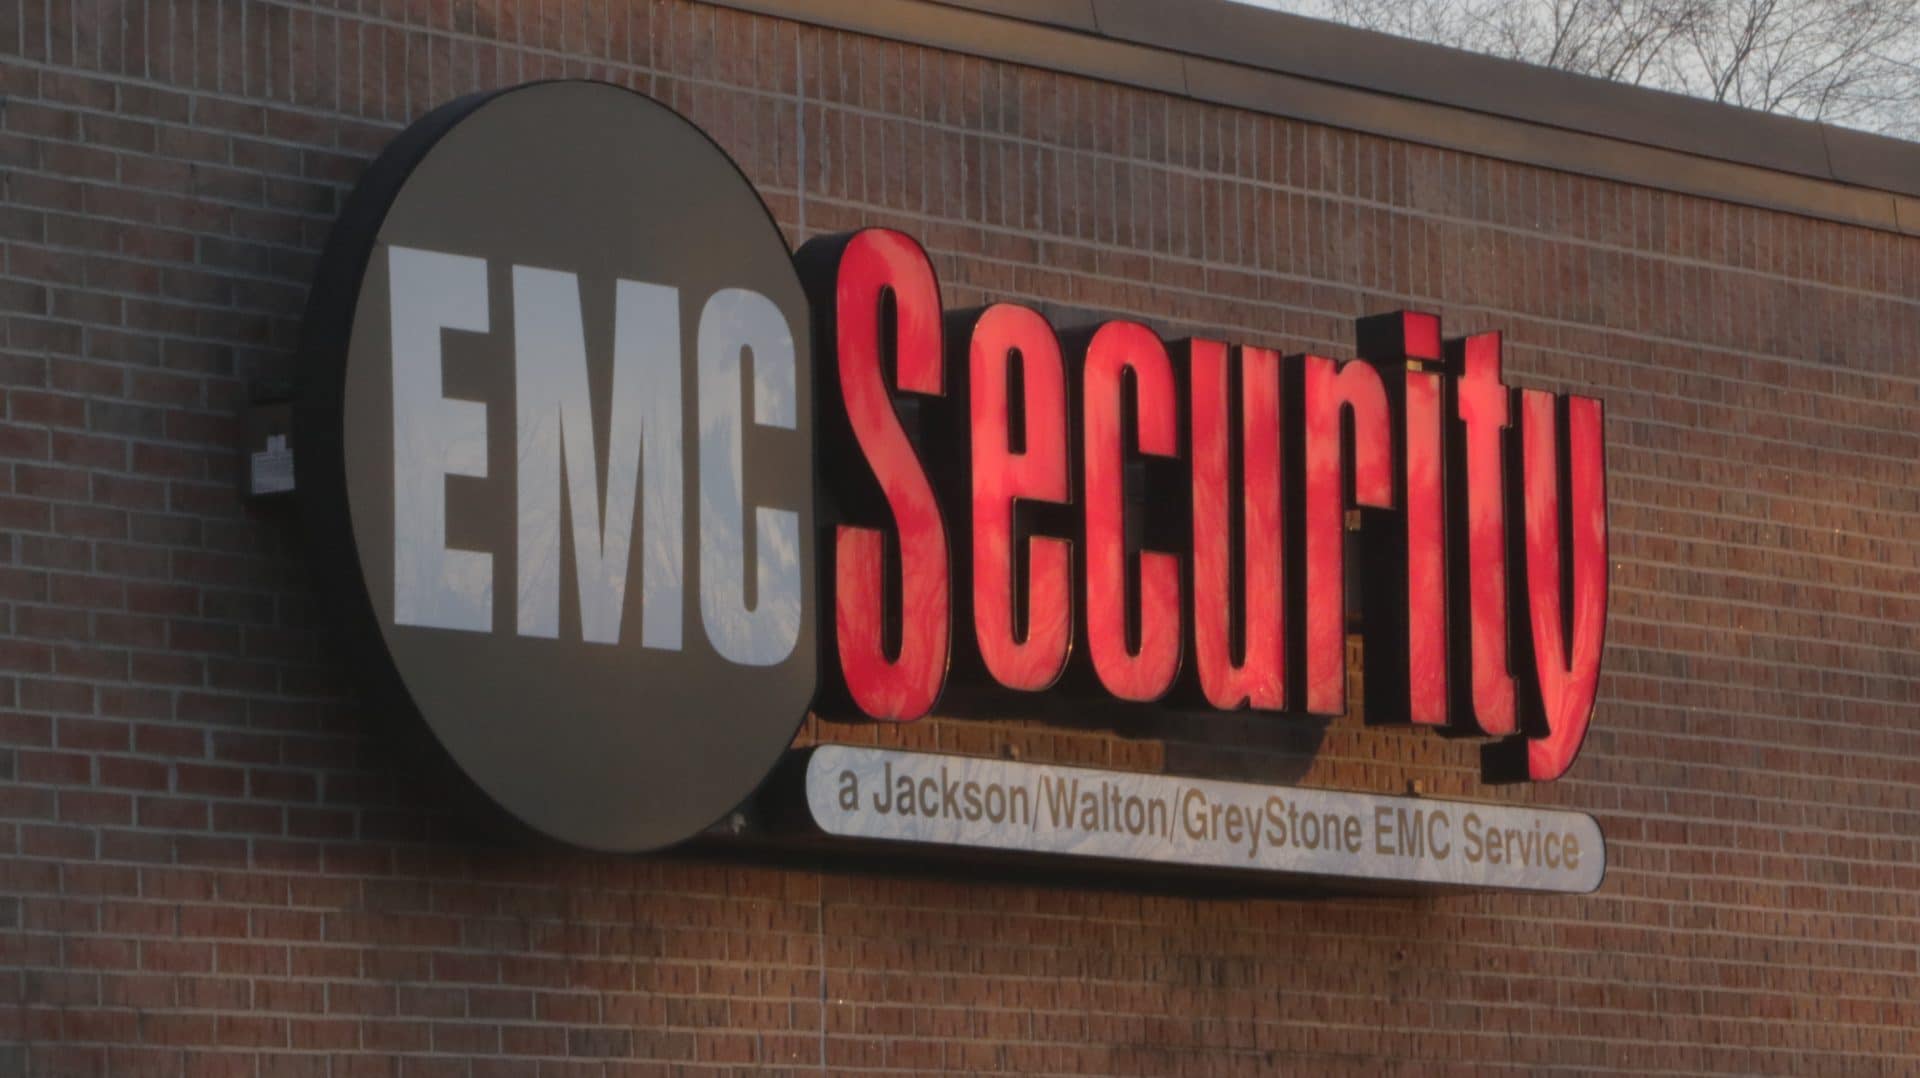 the EMC Security office